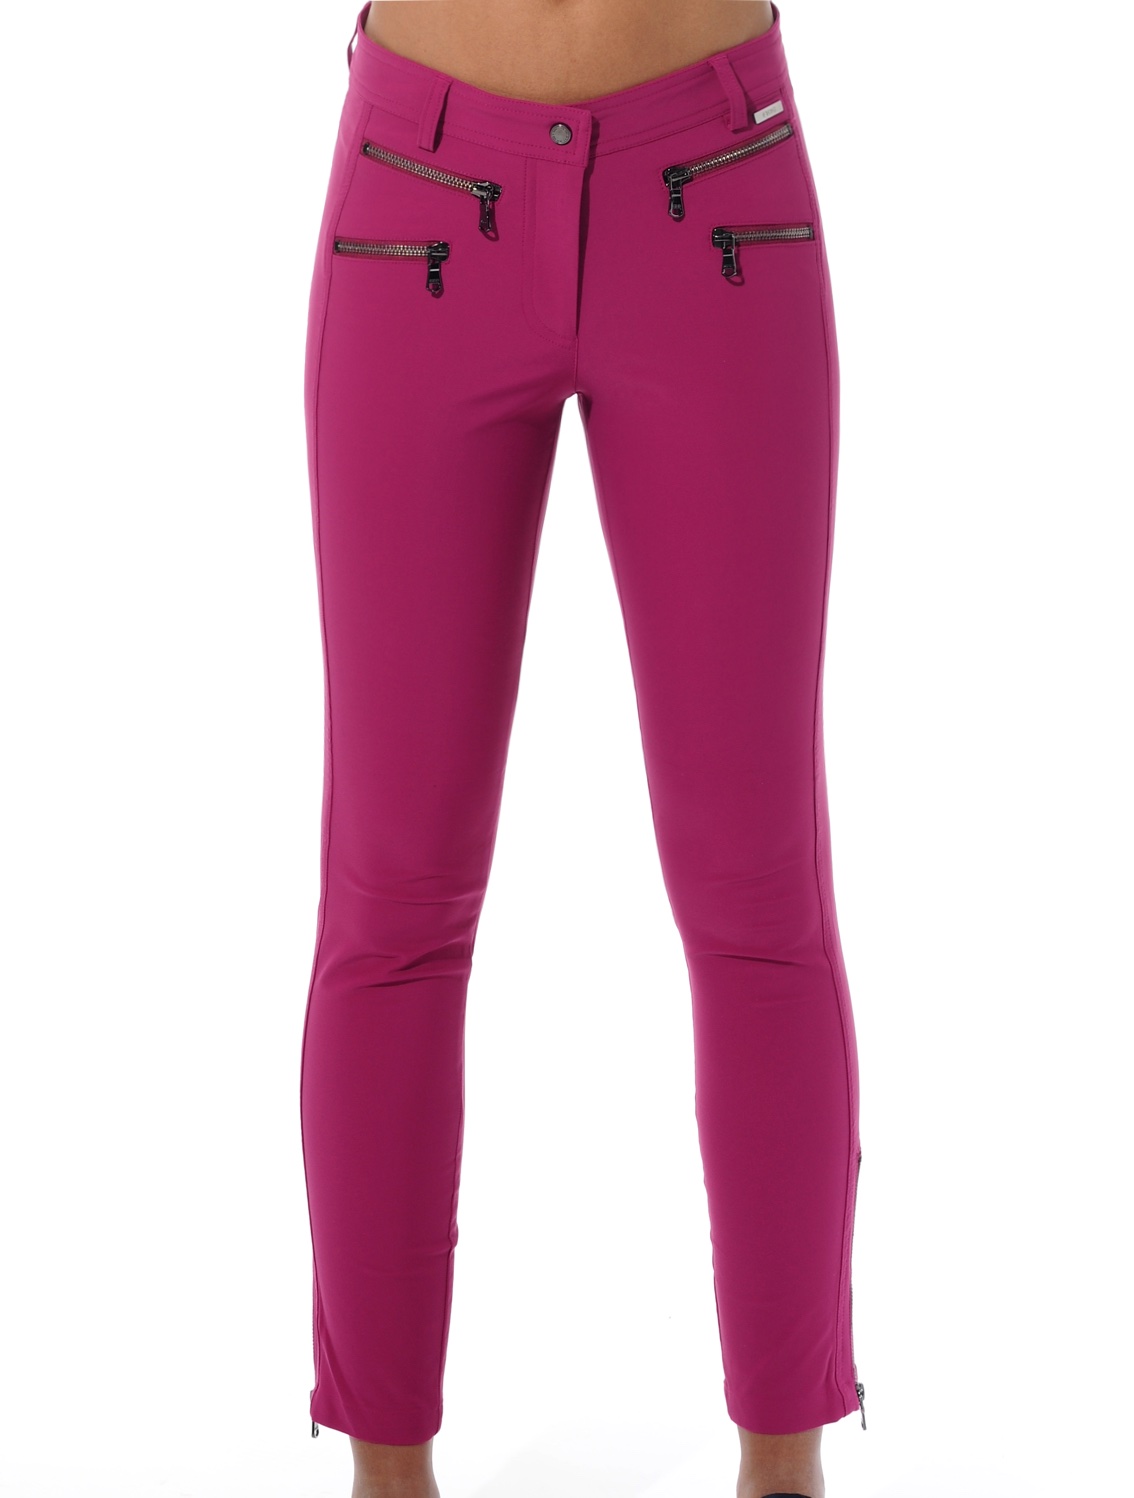 4way stretch double zip ankle pants cassis 